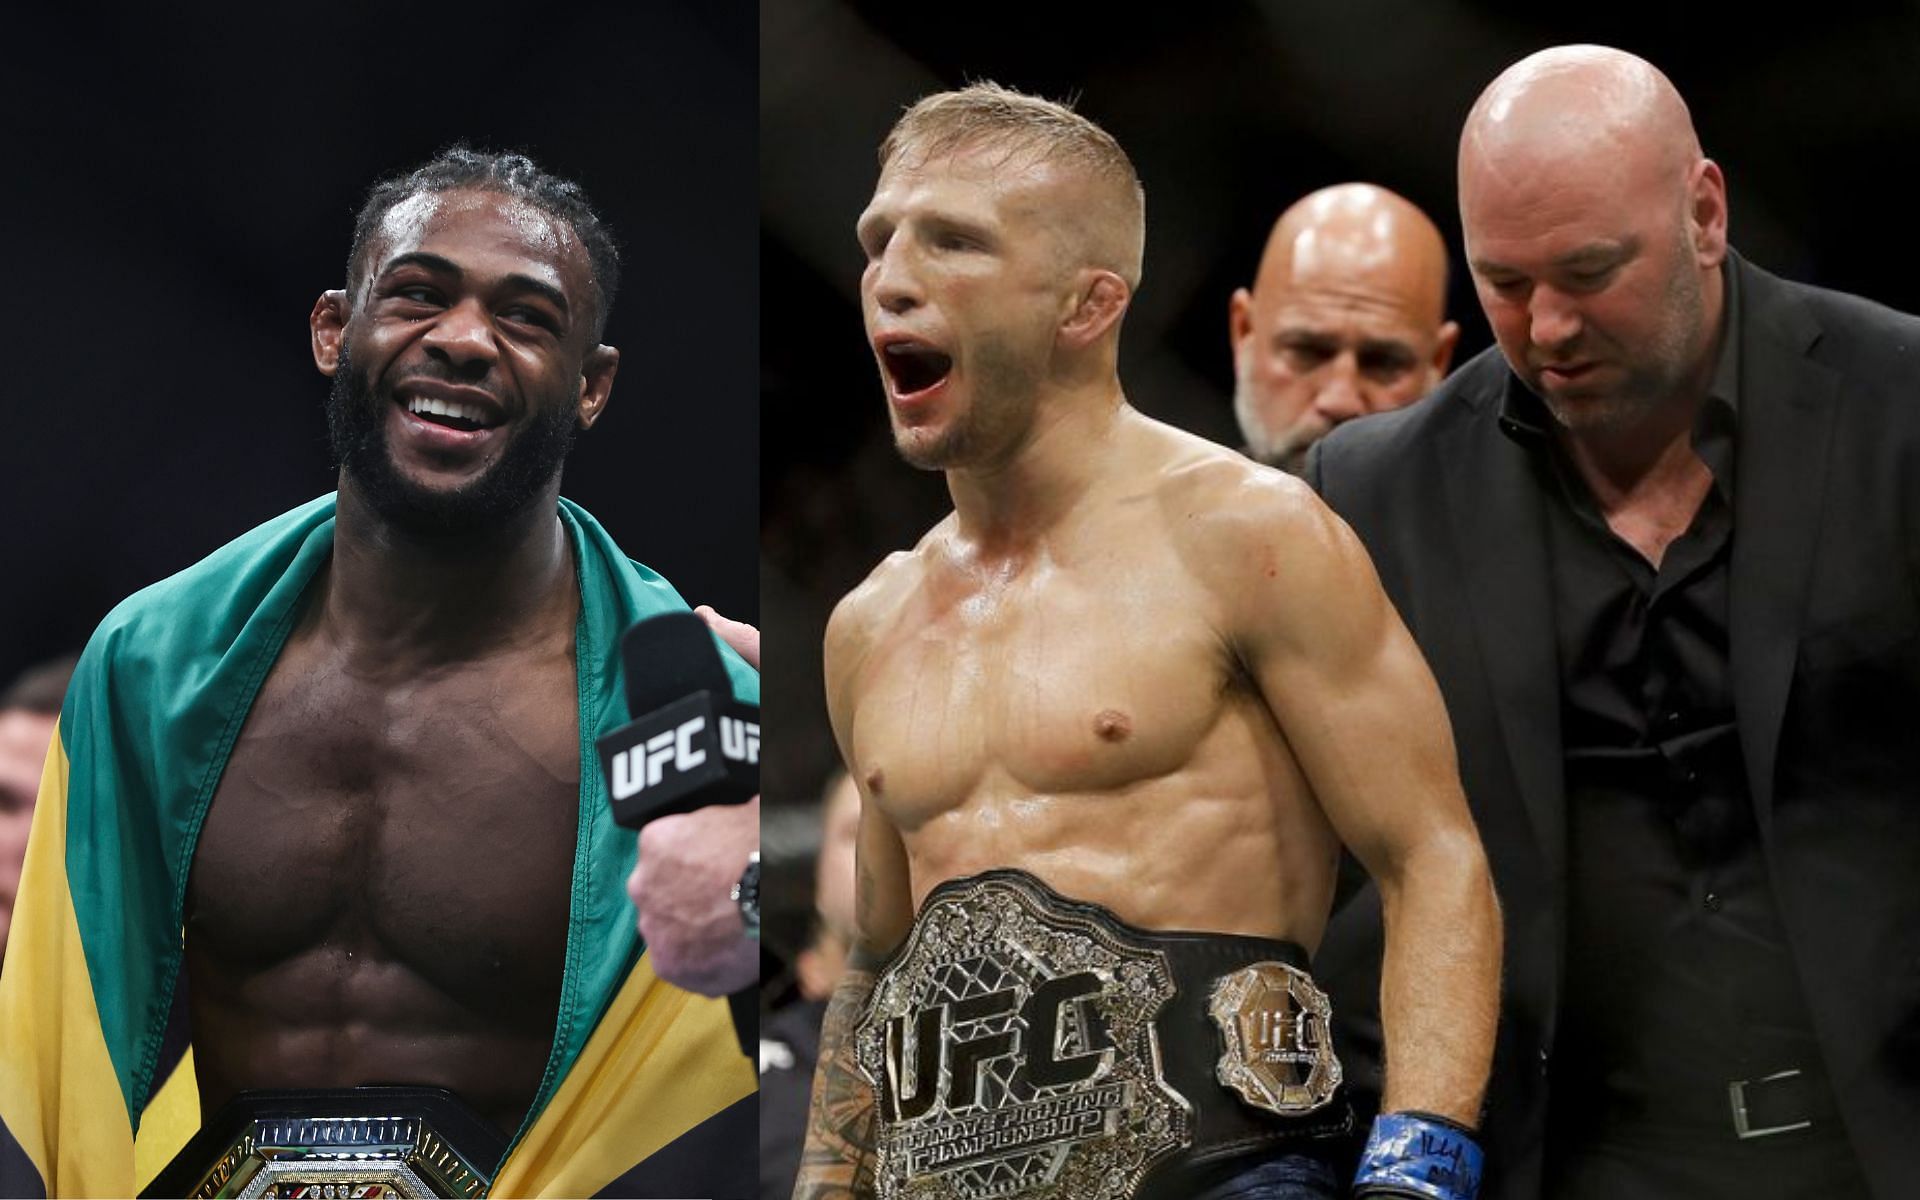 Aljamain Sterling (left), and TJ Dillashaw and Dana White (right). [Images courtesy: left image from Getty Images and right image from MMA Fighting]